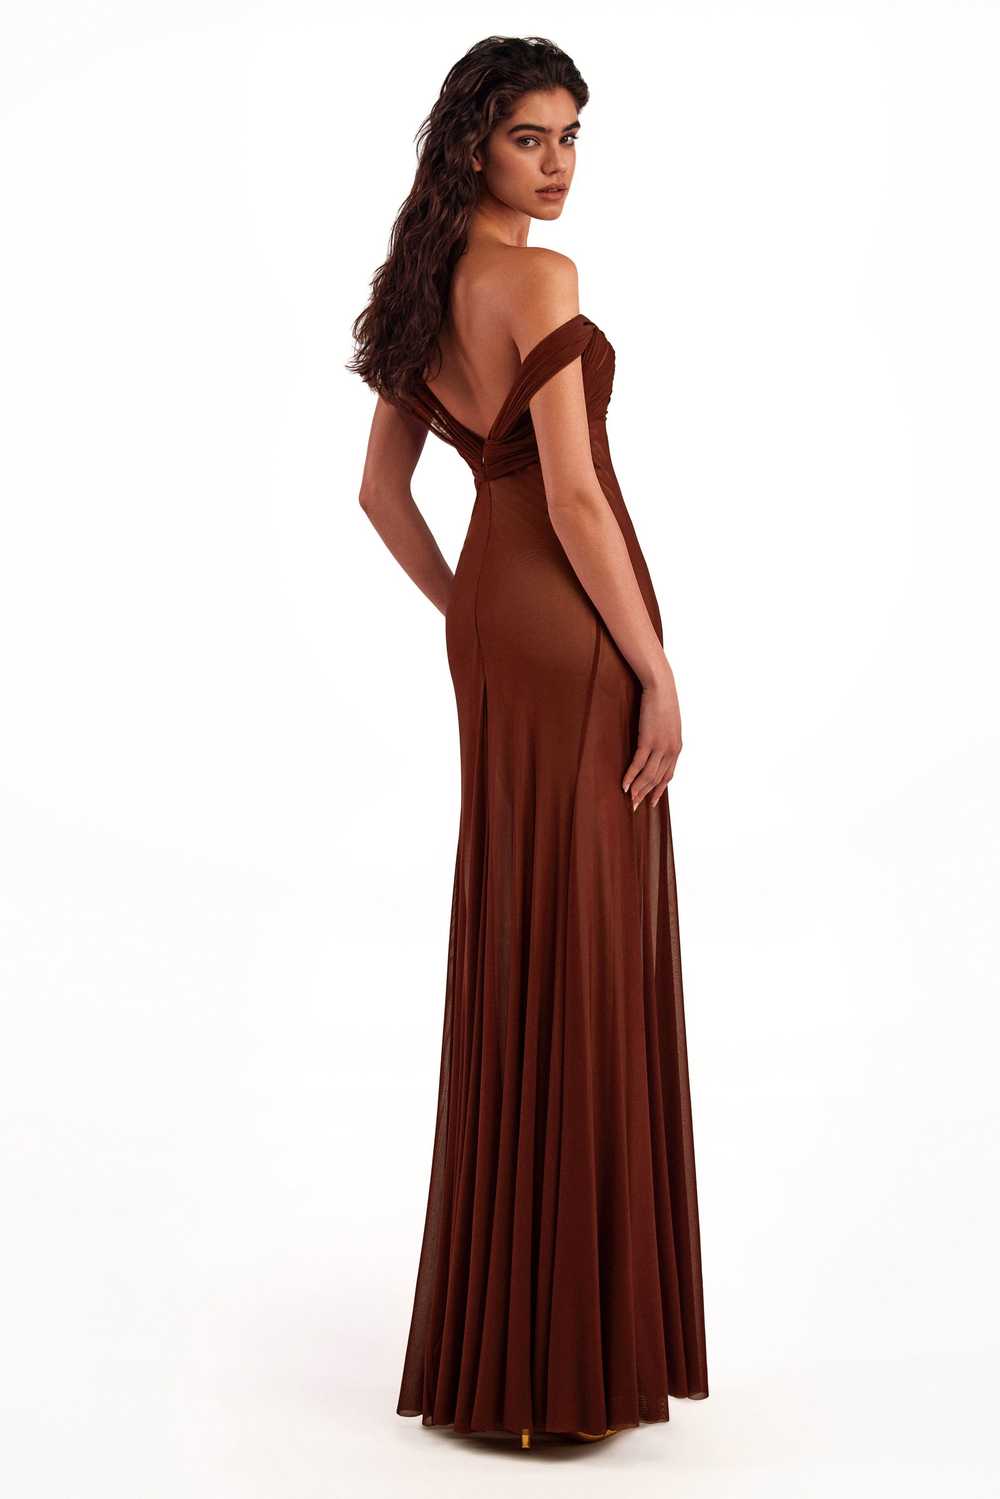 Milla Second-skin maxi dress in chocolate color - image 4